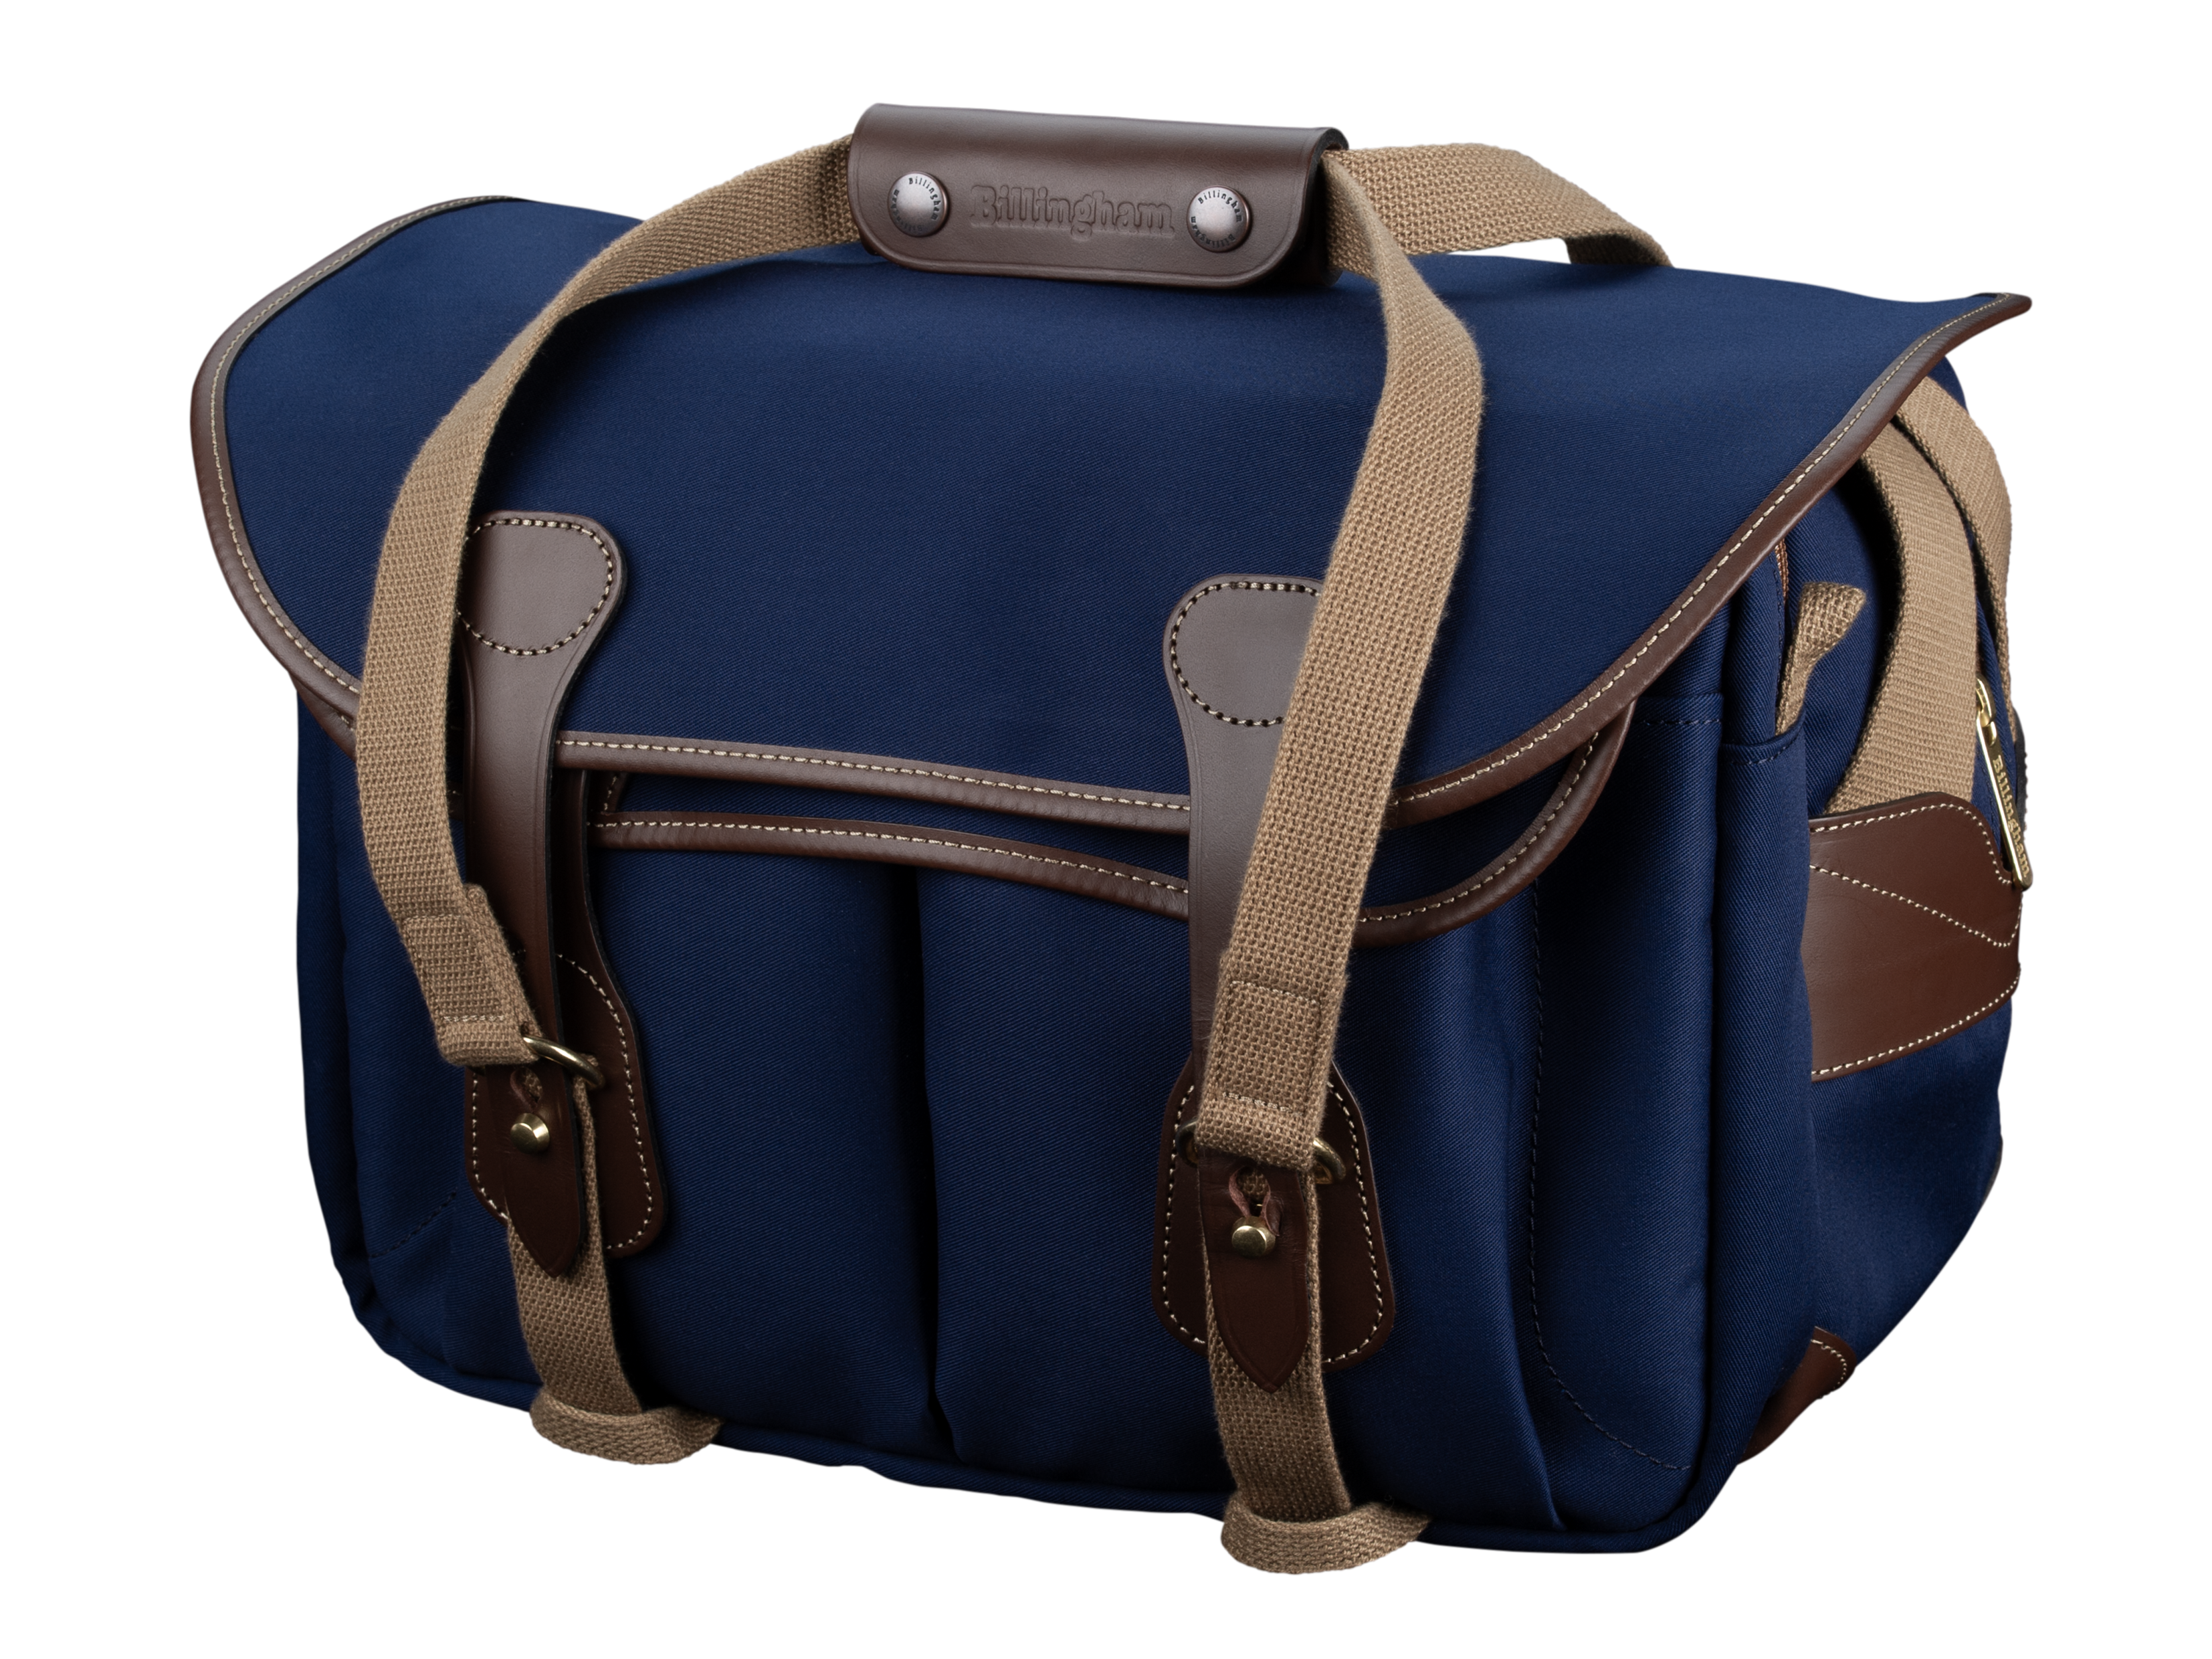 335 MKII Camera/Laptop Bag - Navy Canvas / Chocolate Leather